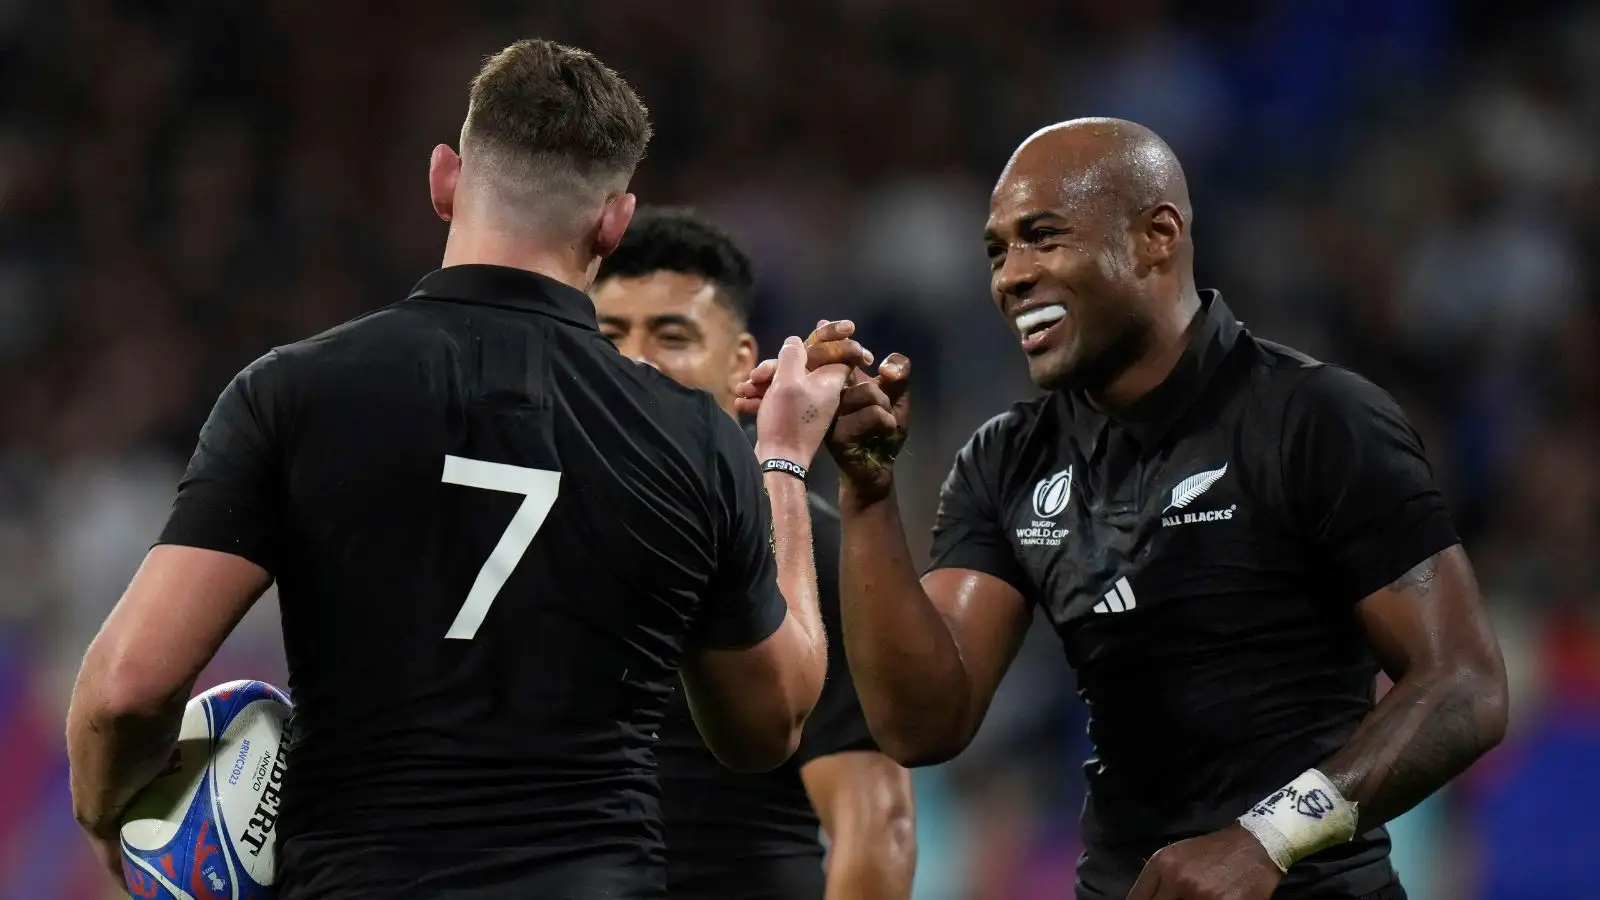 All Blacks flanker Dalton Papali'i celebrates with teammate Mark Telea, after scoring a try during the Rugby World Cup Pool A match.